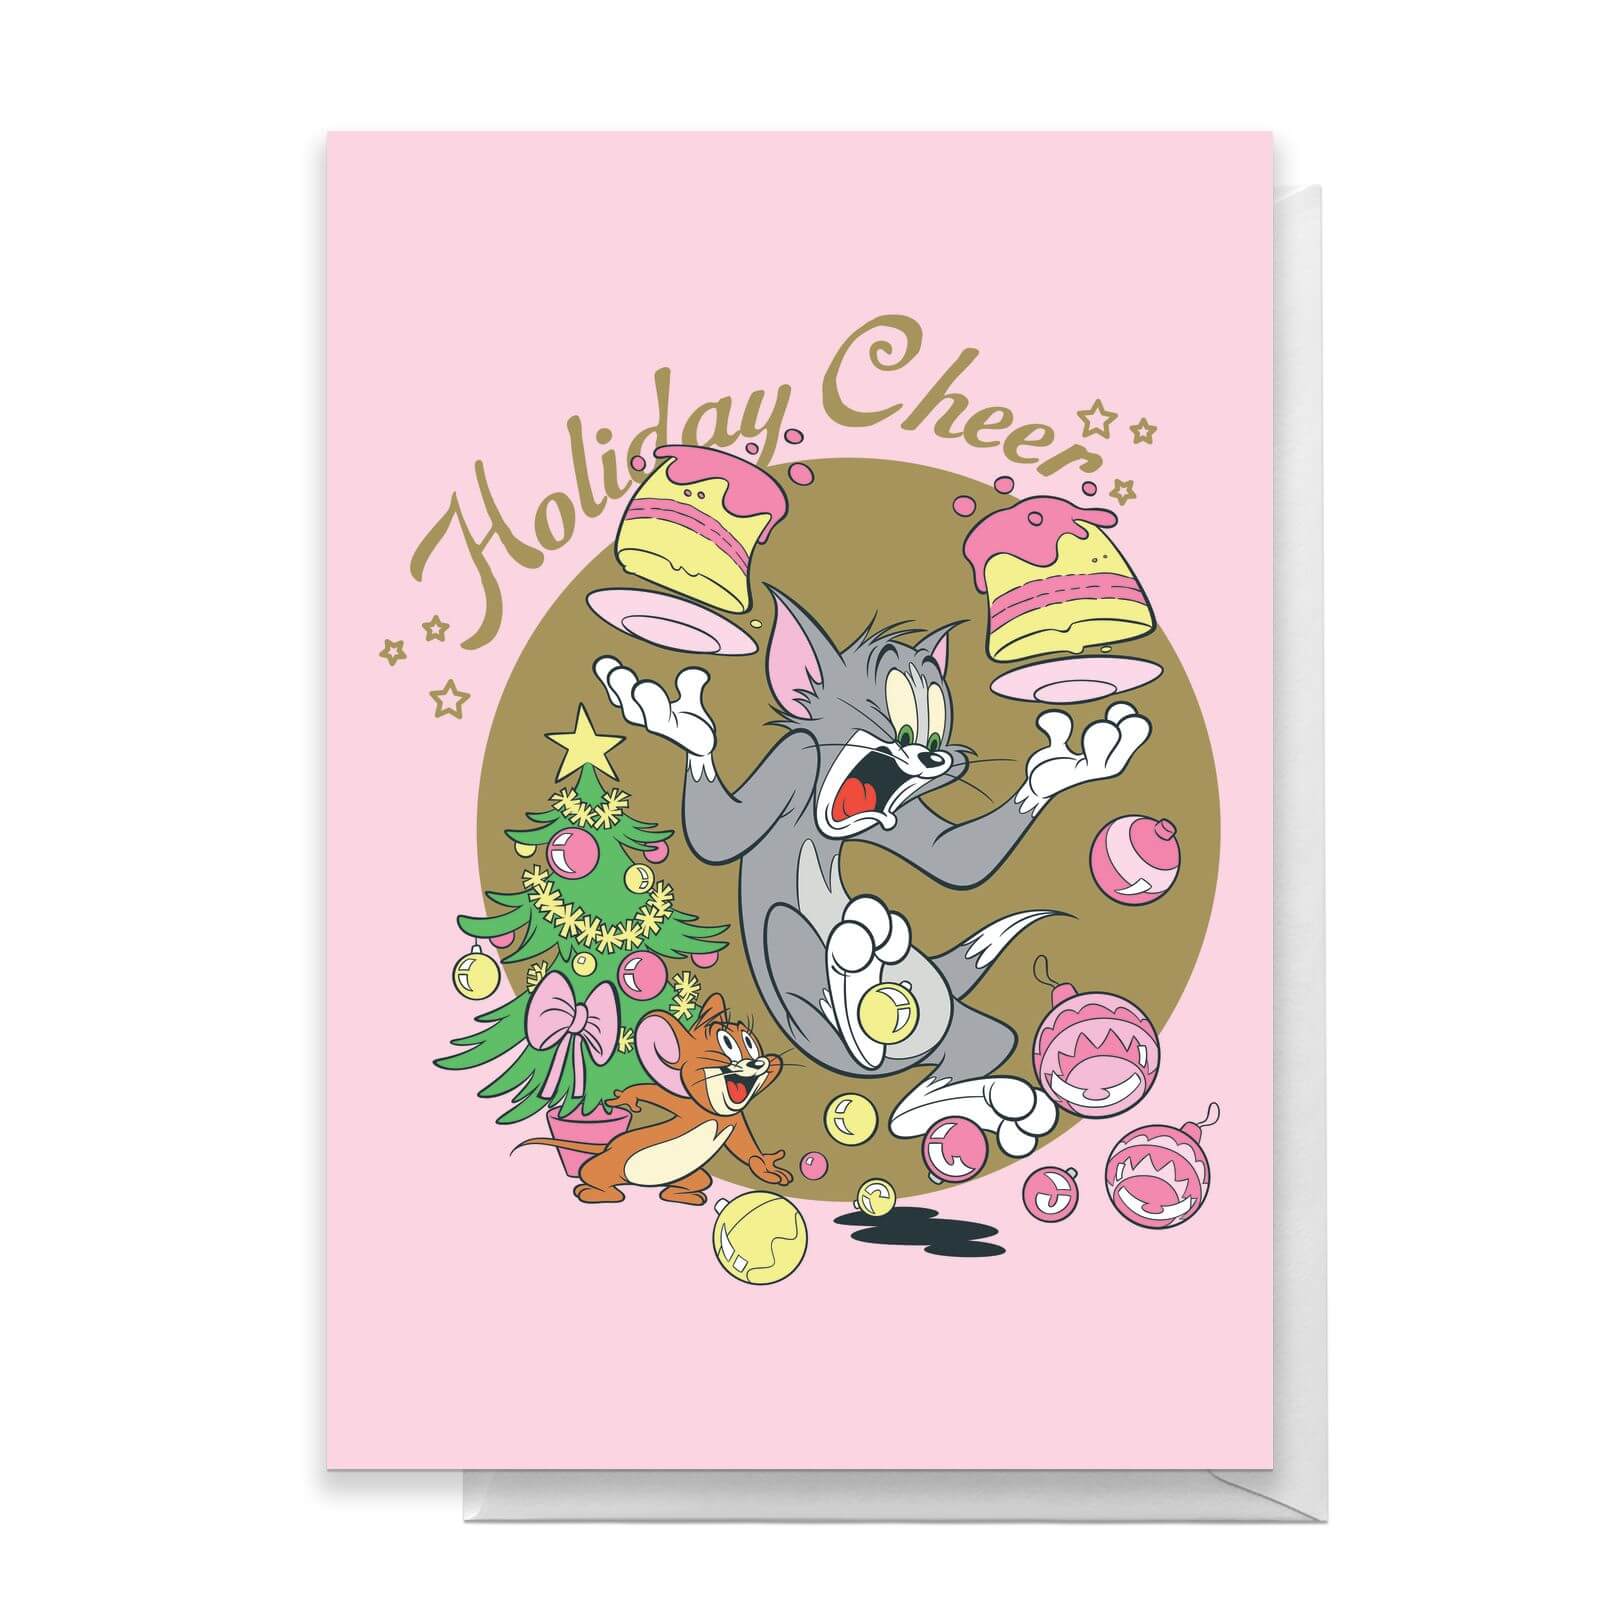 Tom And Jerry Holiday Cheers Greetings Card - Standard Card